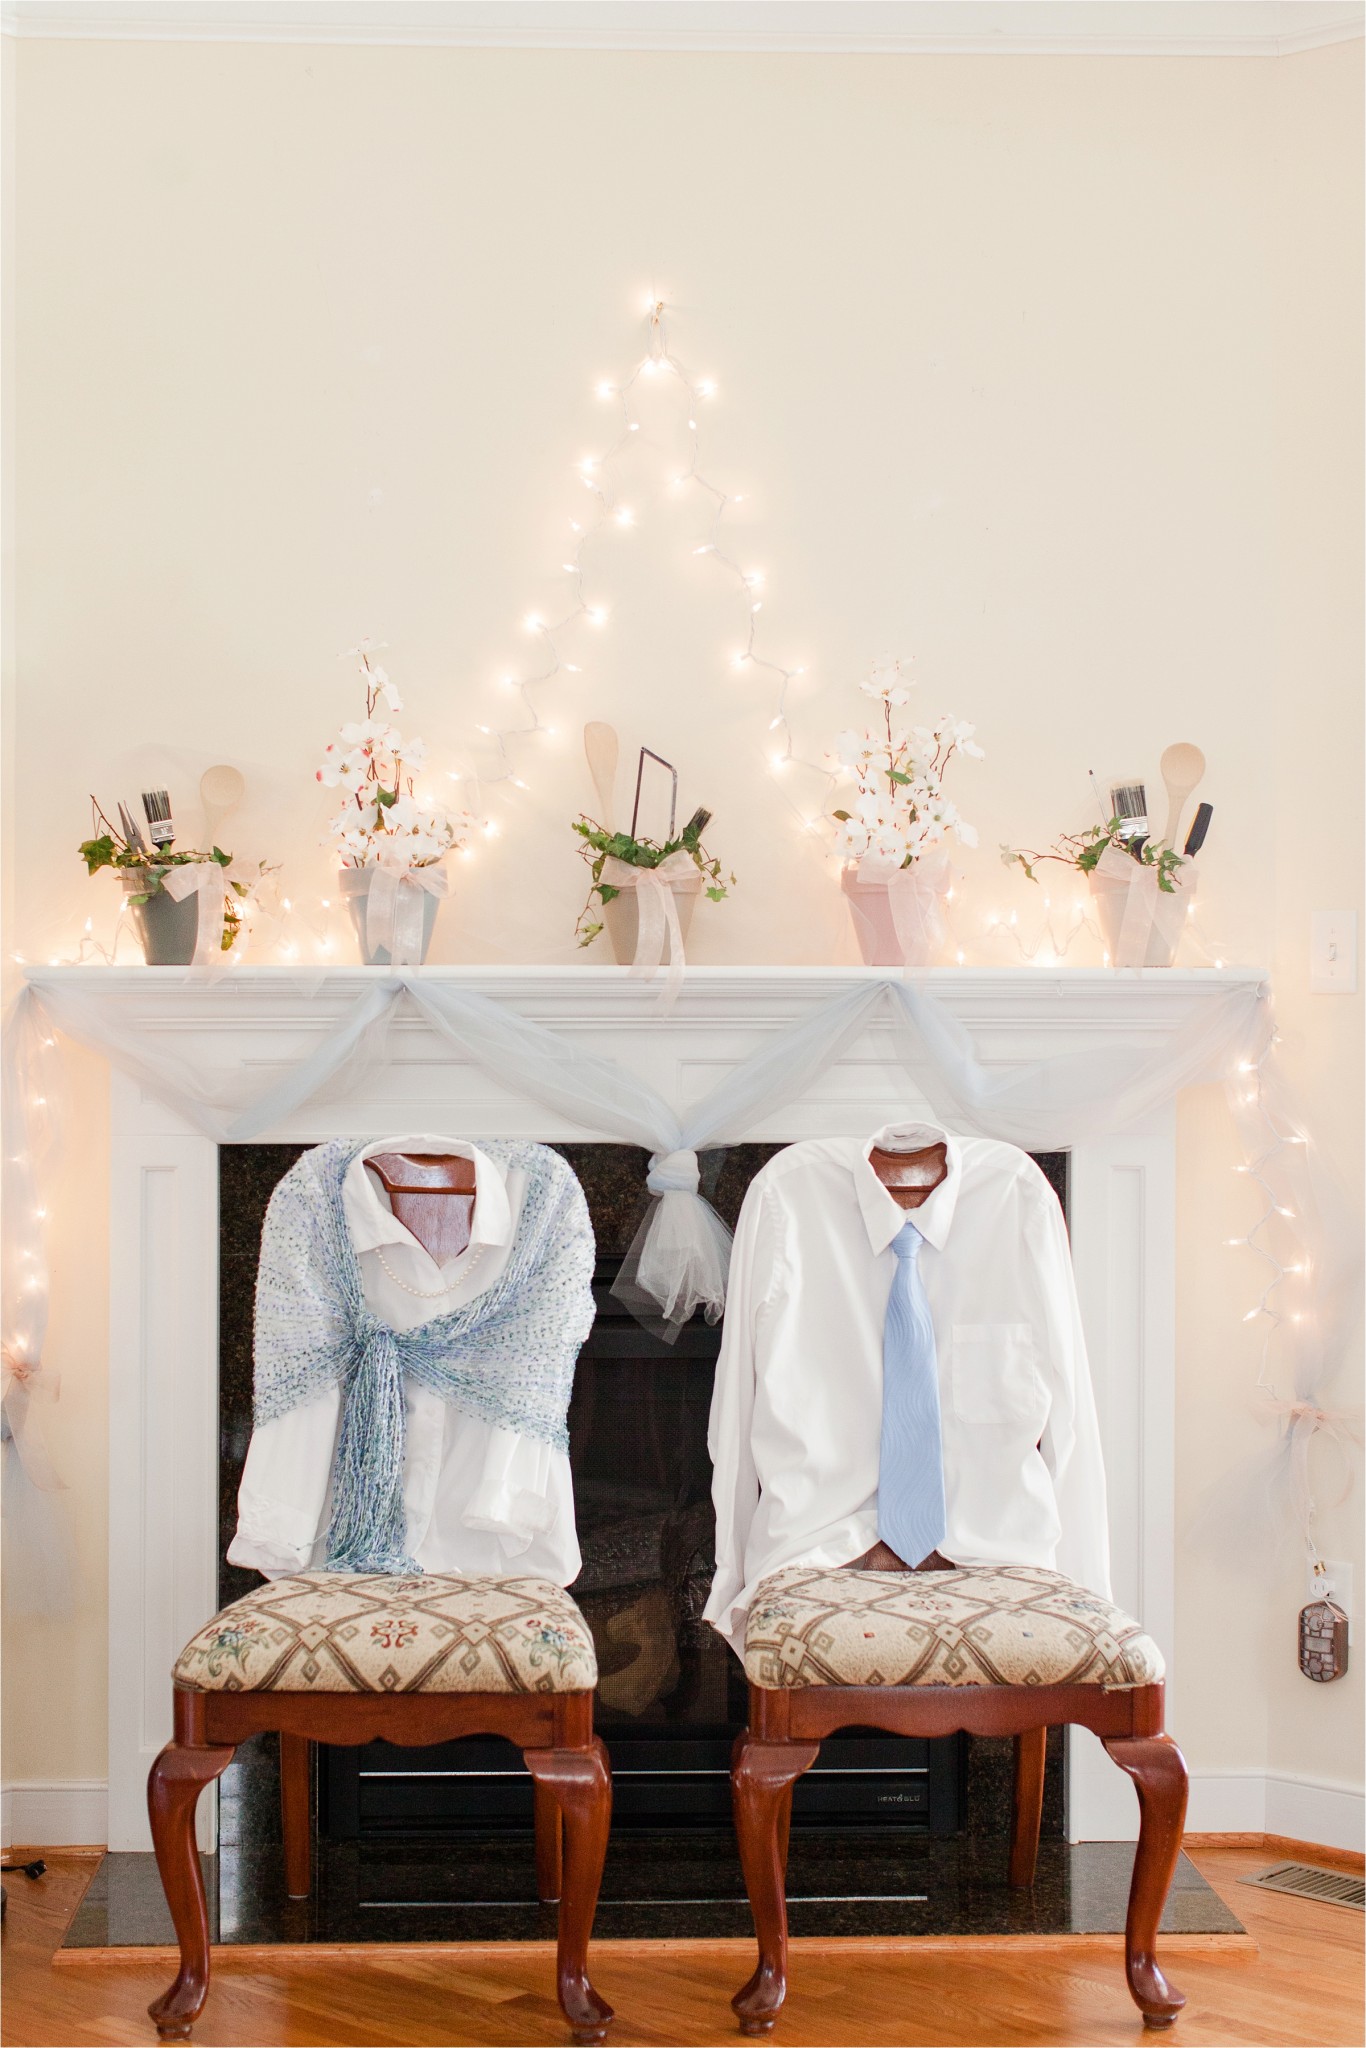 a creative way to feature the seats of the bride and groom at a wedding shower